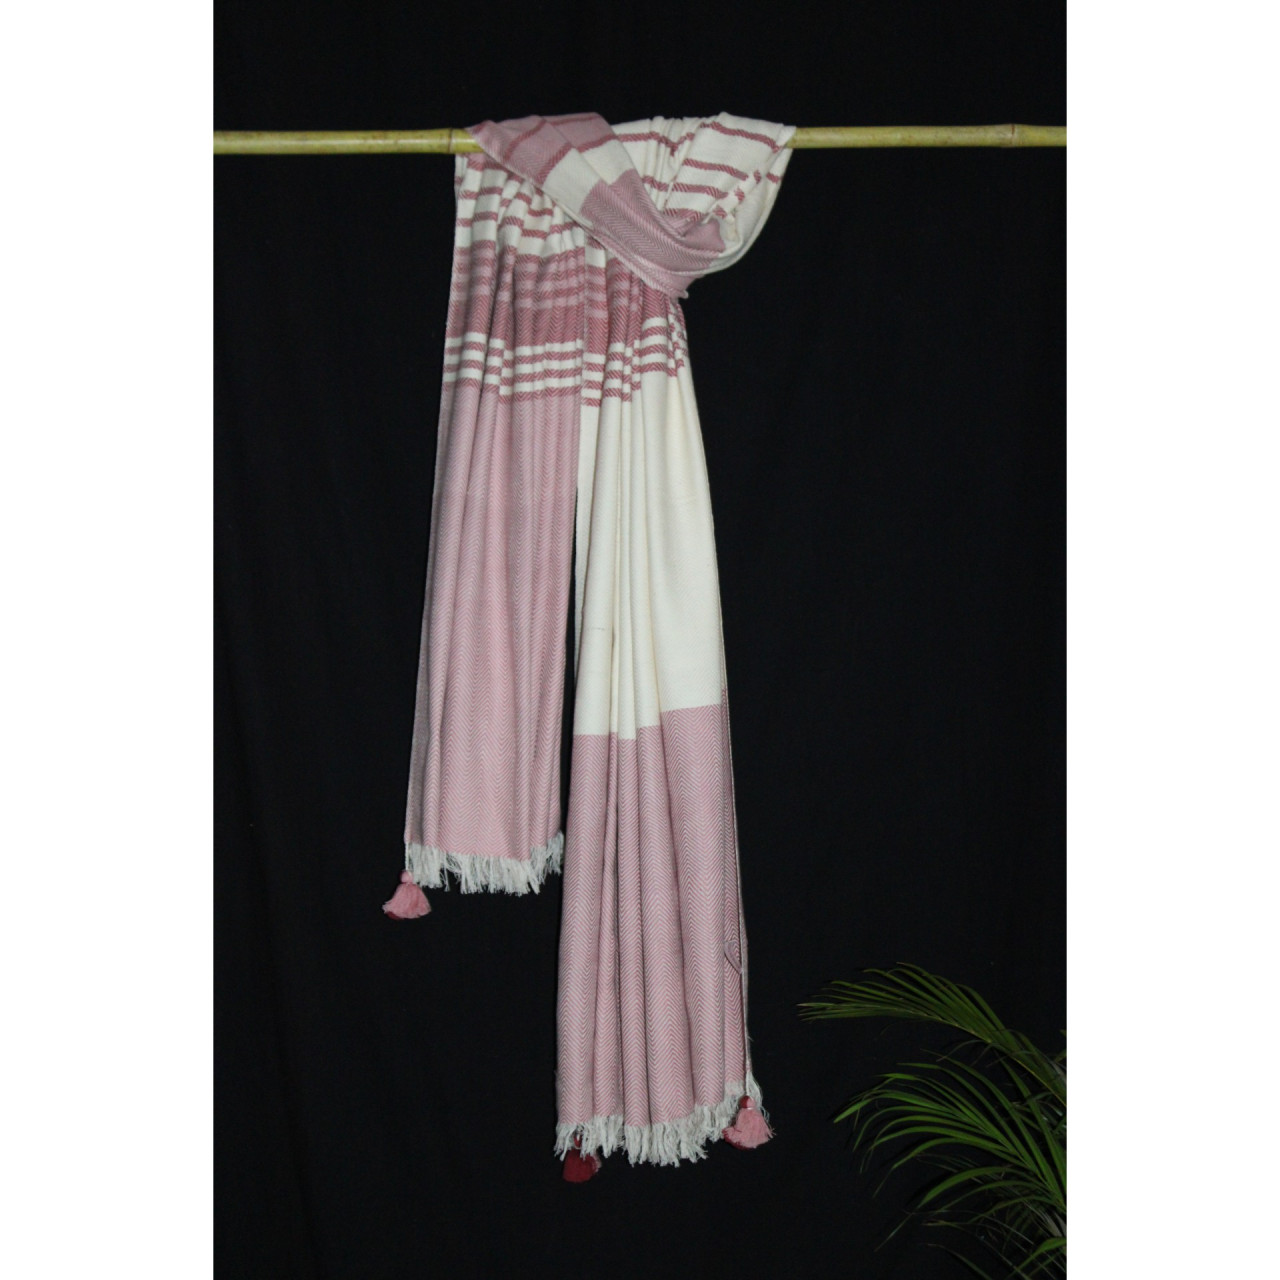 (1436) Cotton and khadi  Azo-free dyed throw from Bihar - White, pink, red, stripes, textured